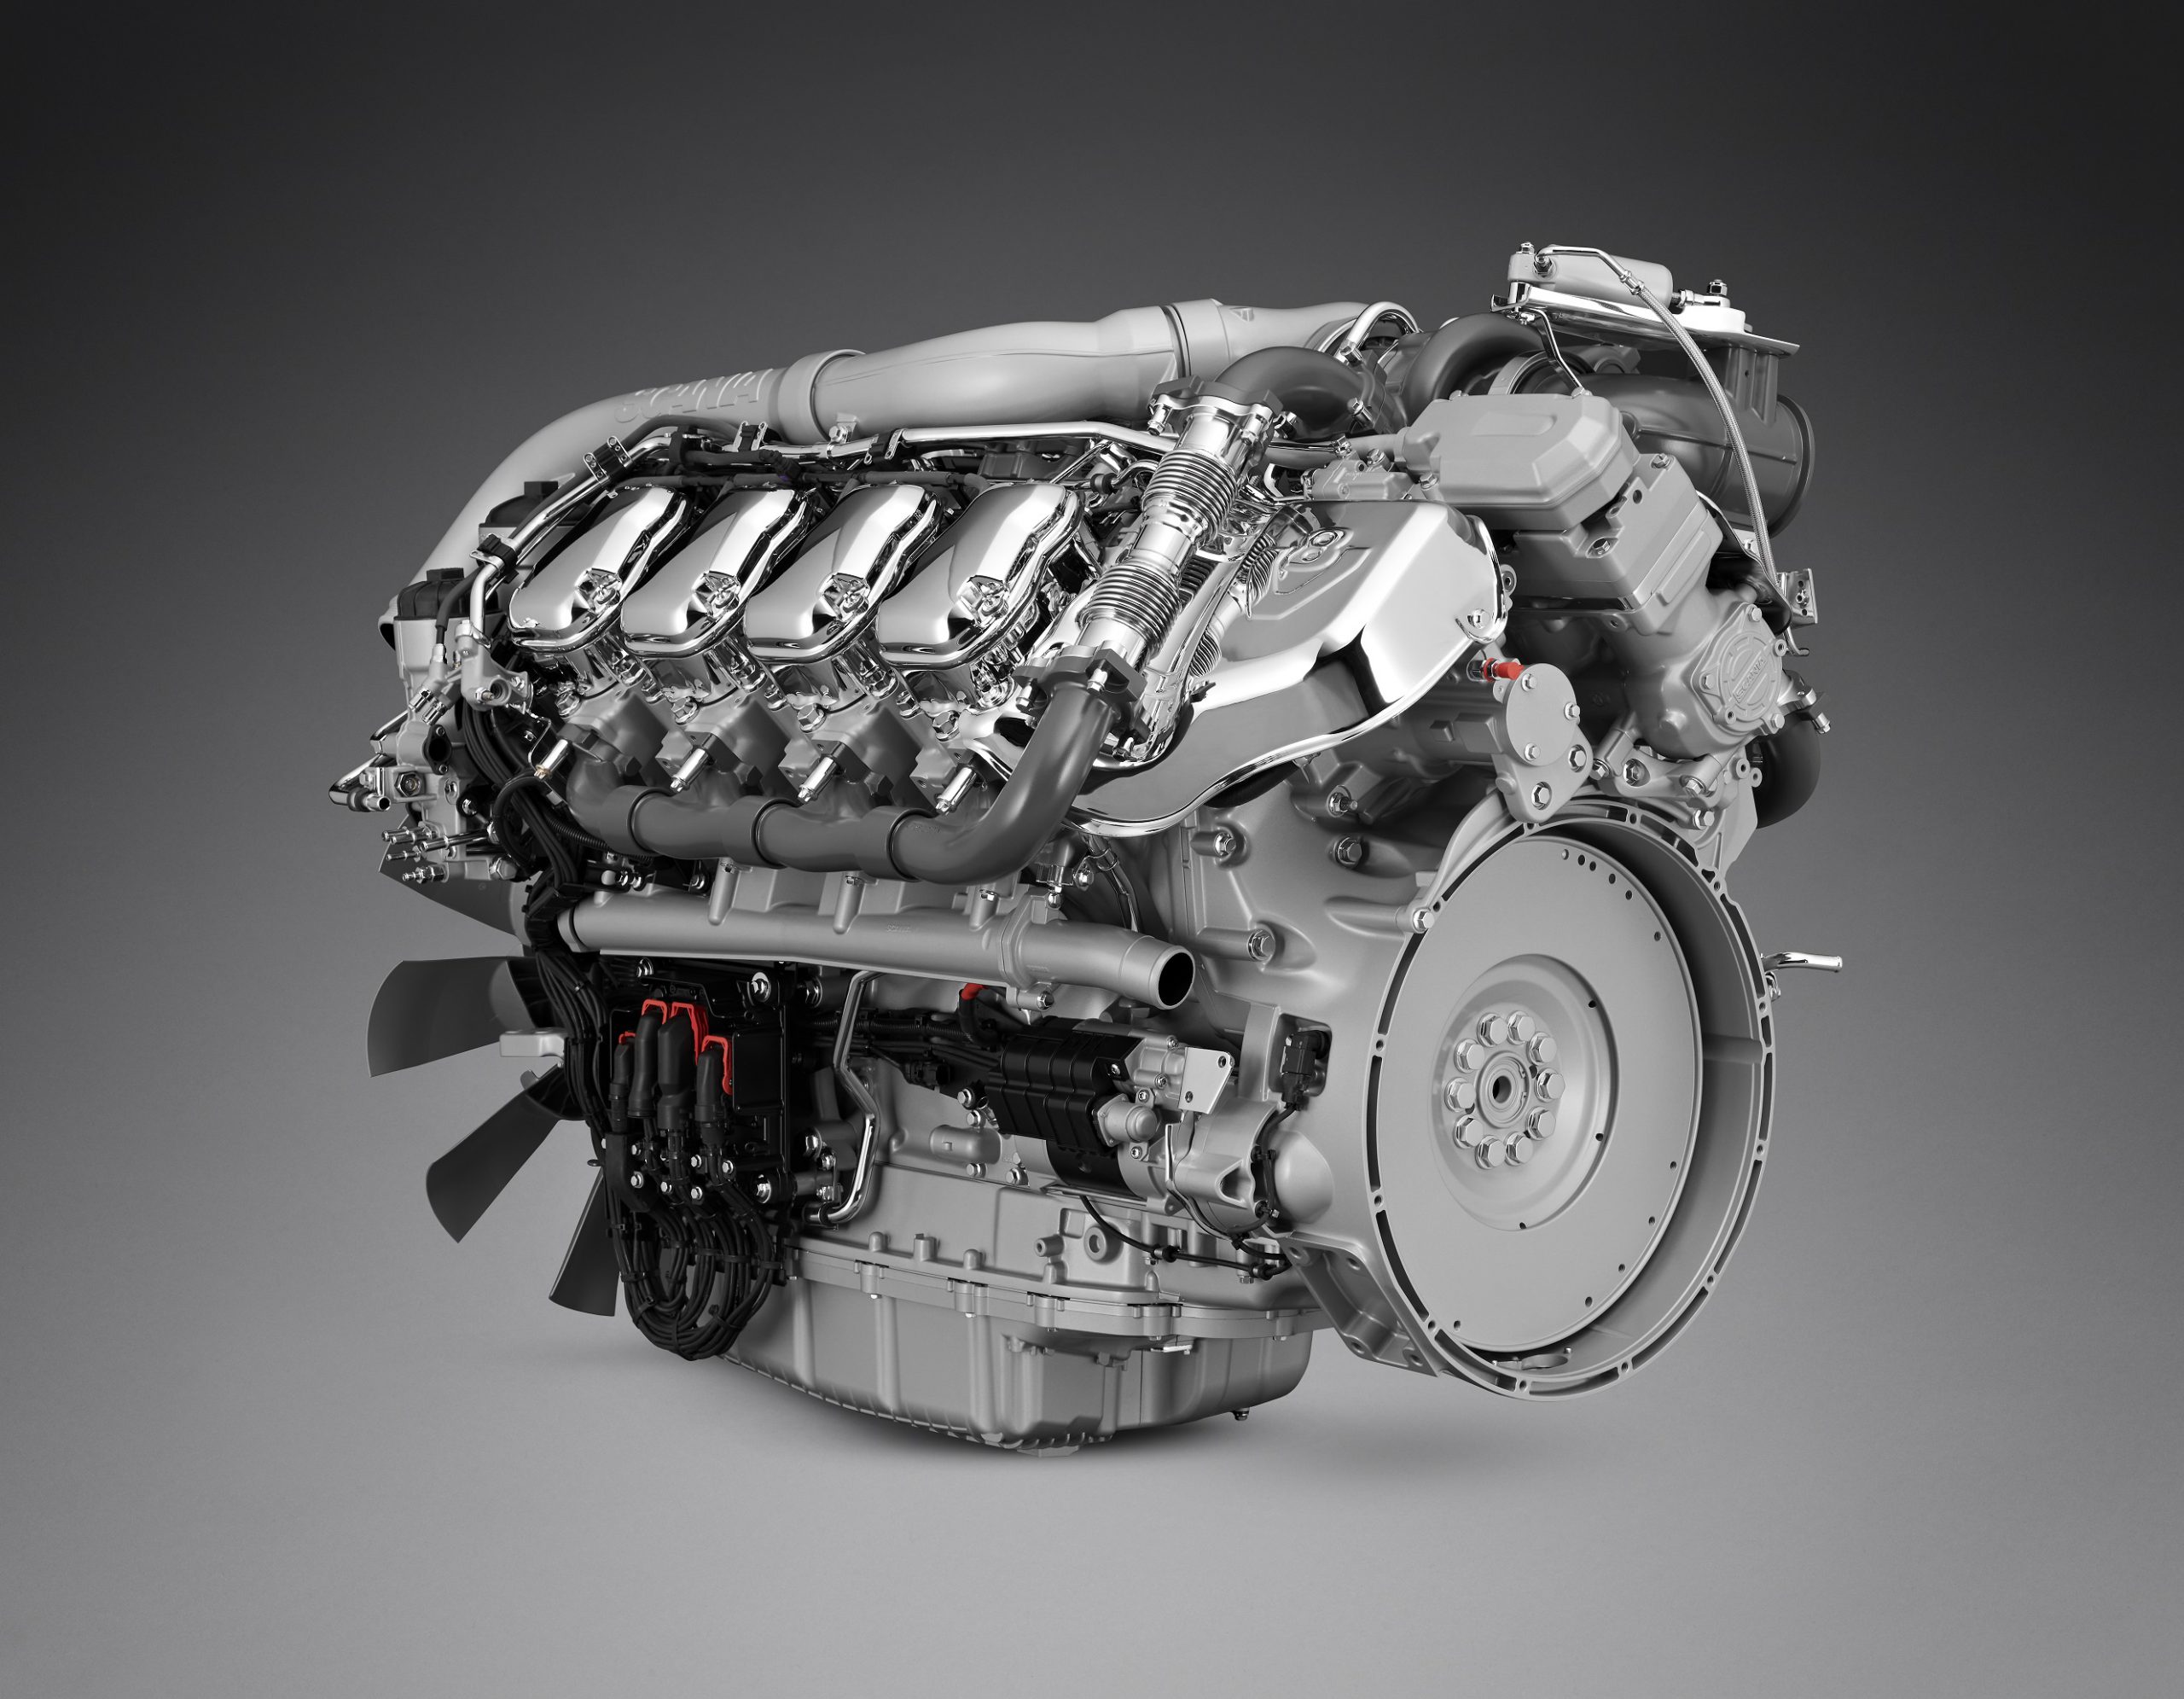 A higher power peak for the iconic Scania V8 engine - Powertrain